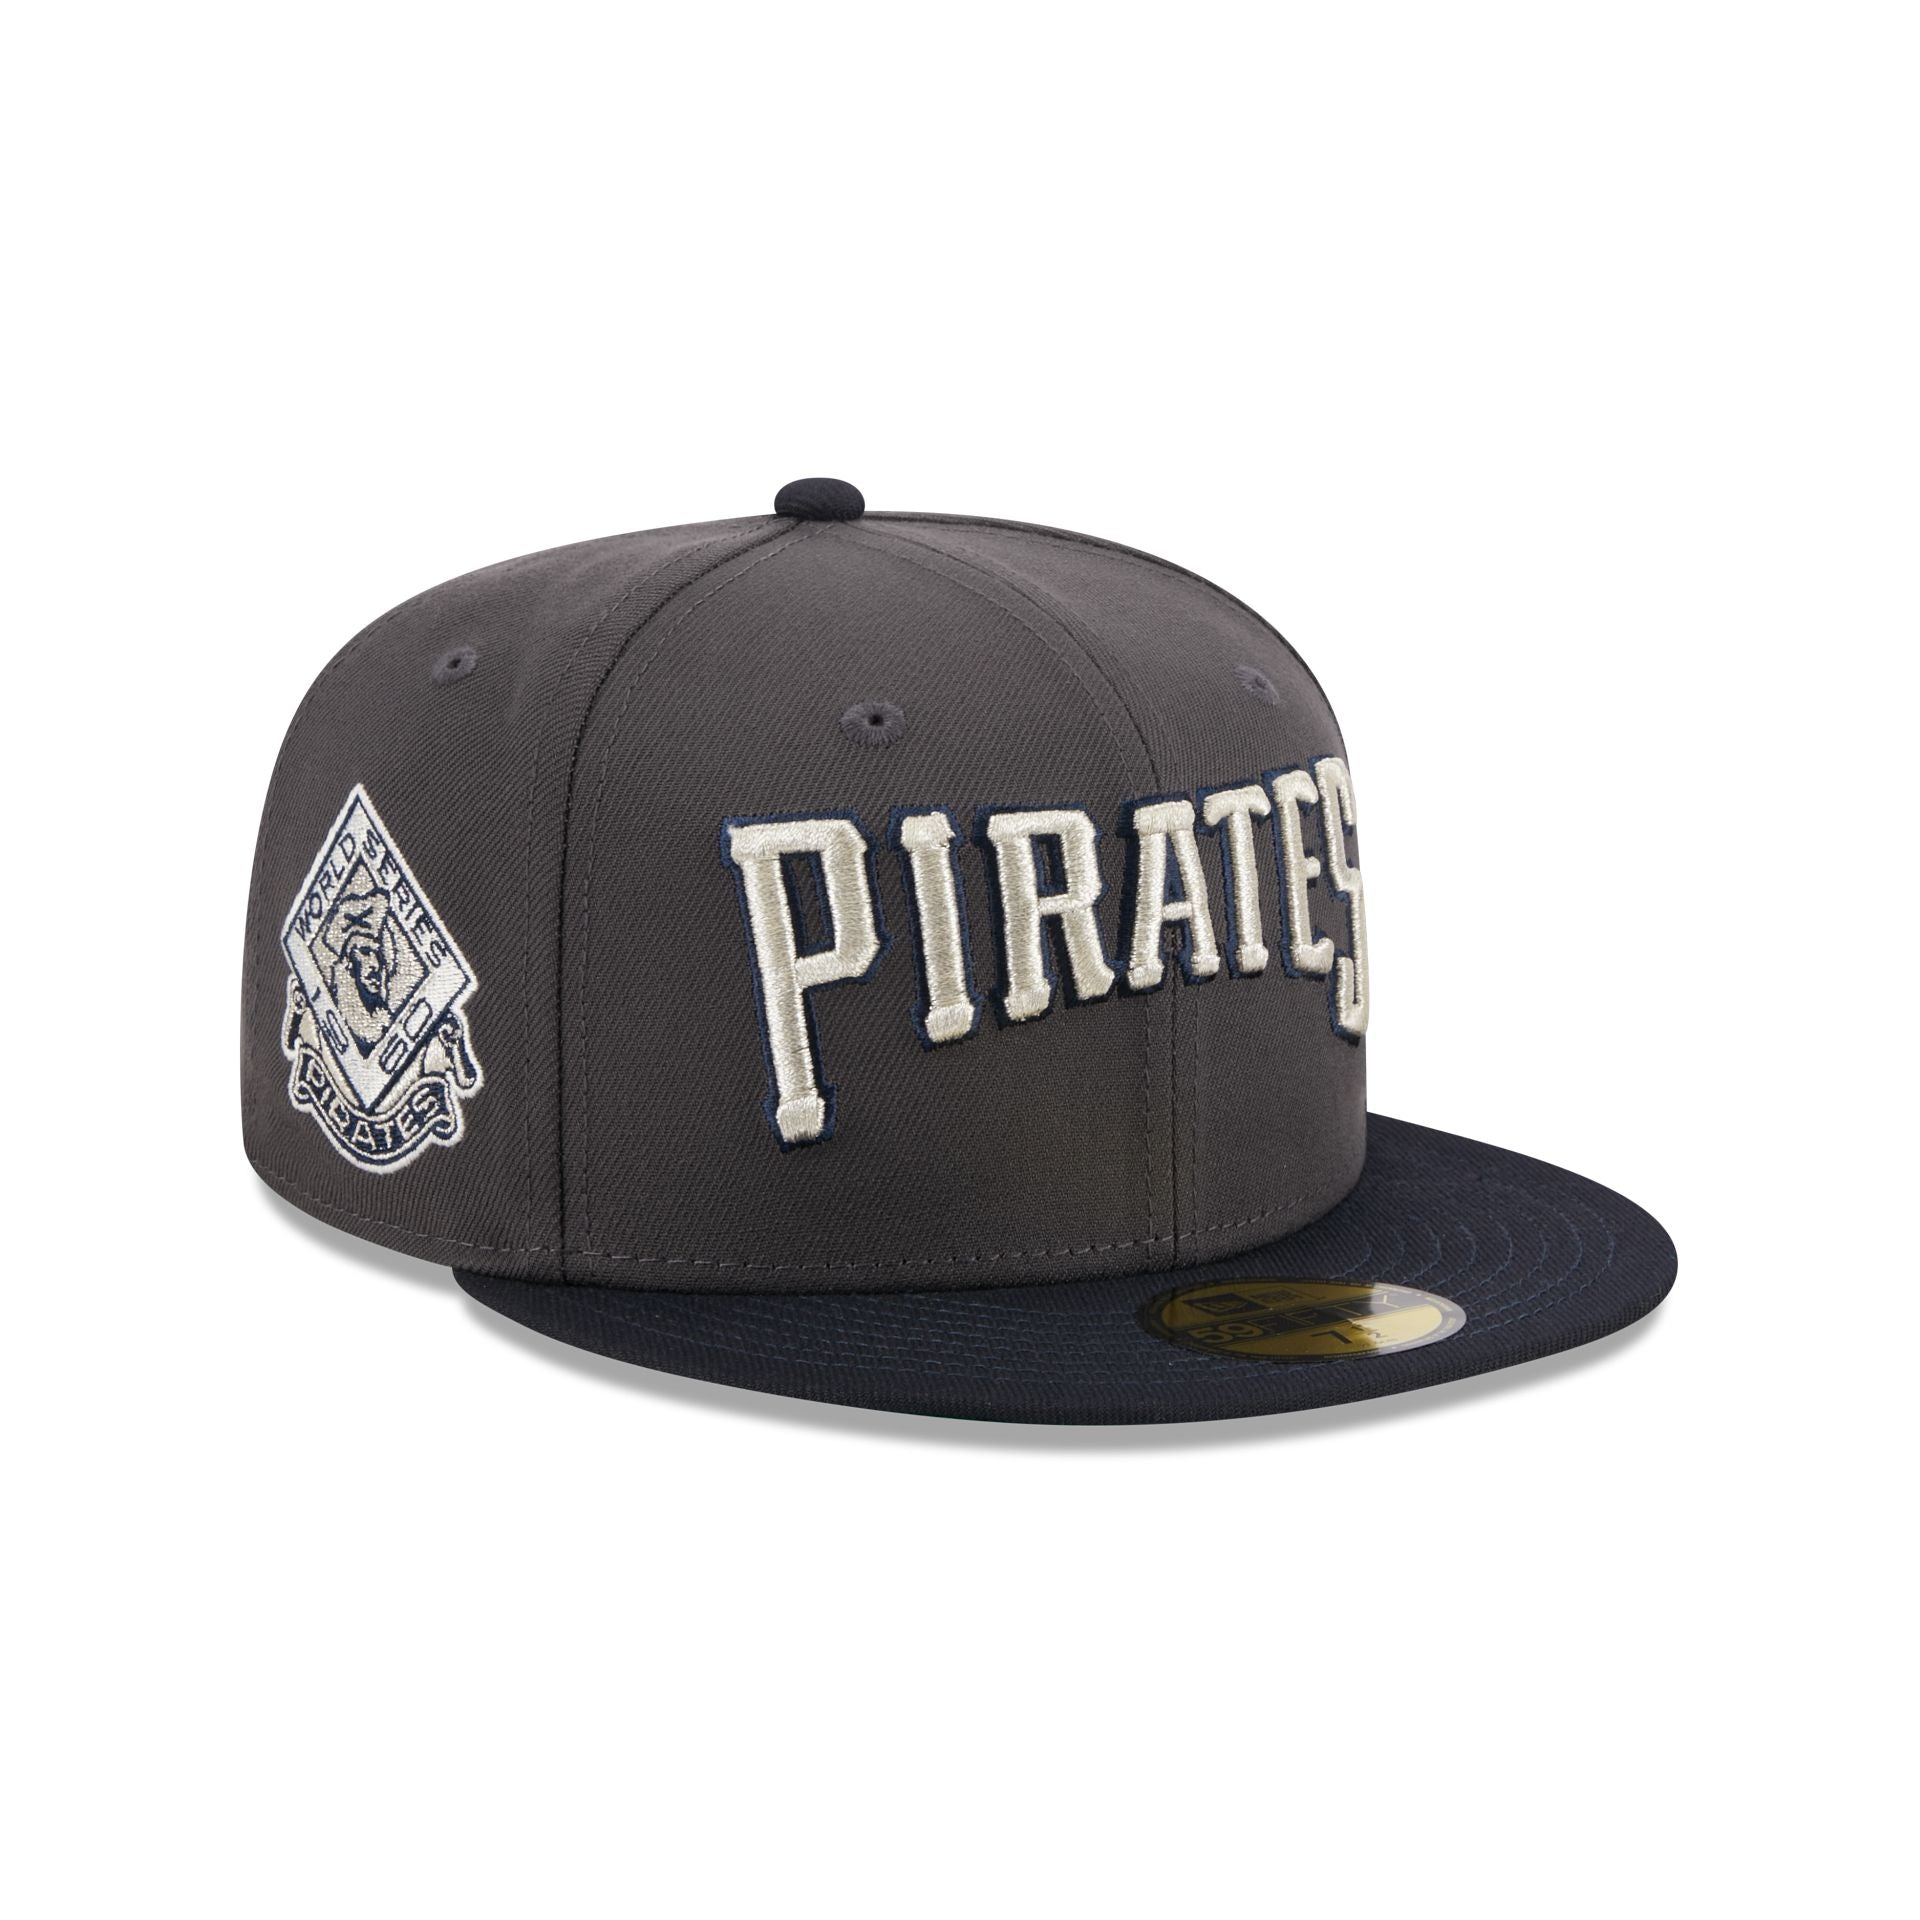 Pittsburgh Pirates Graphite Crown 59FIFTY Fitted Hat – New Era Cap